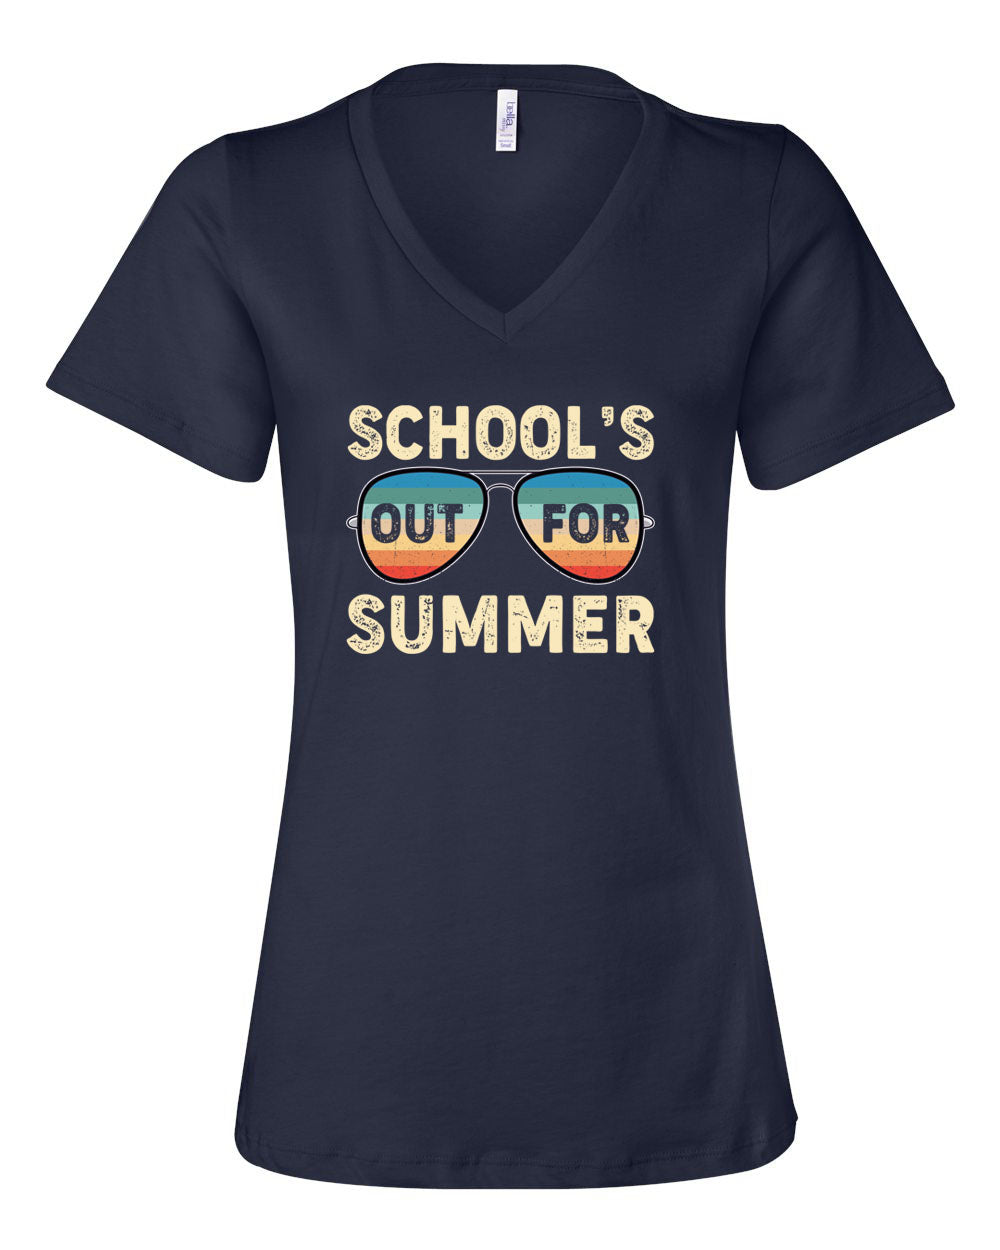 School's Out V-neck T-shirt